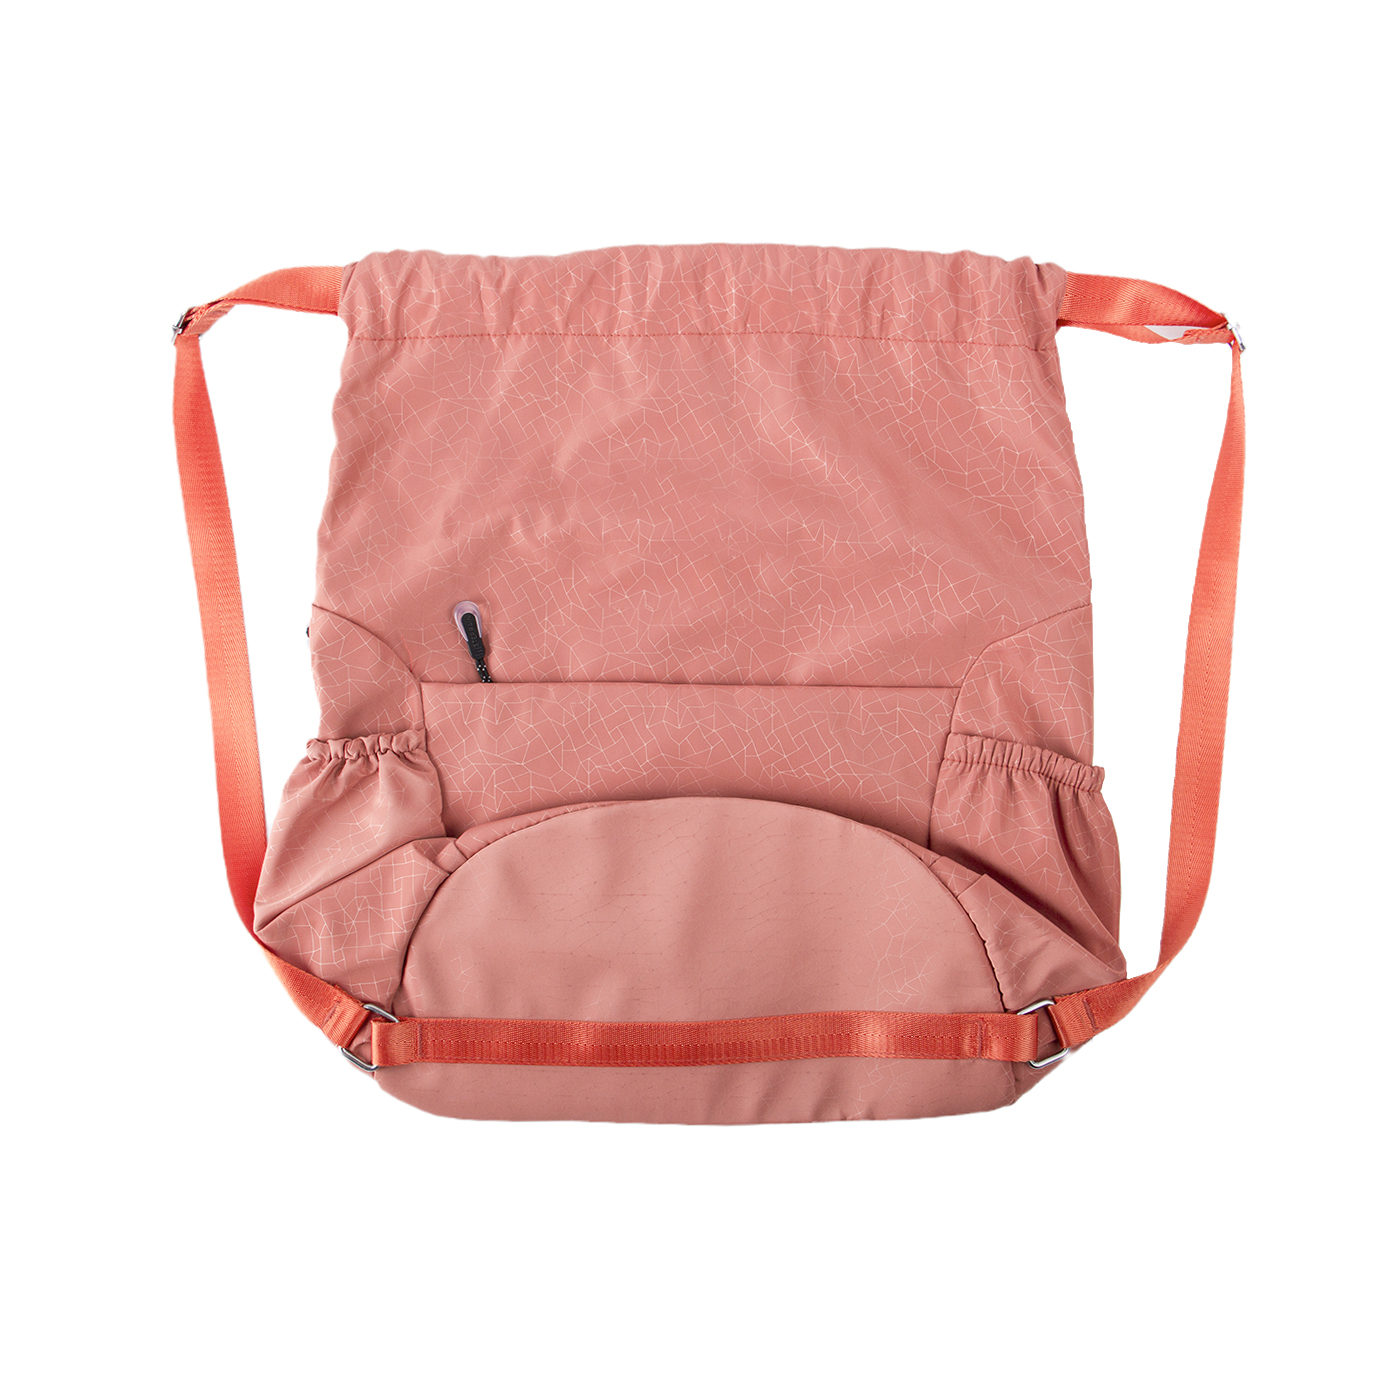 Drawstring Backpack With Front Zipper Pocket3